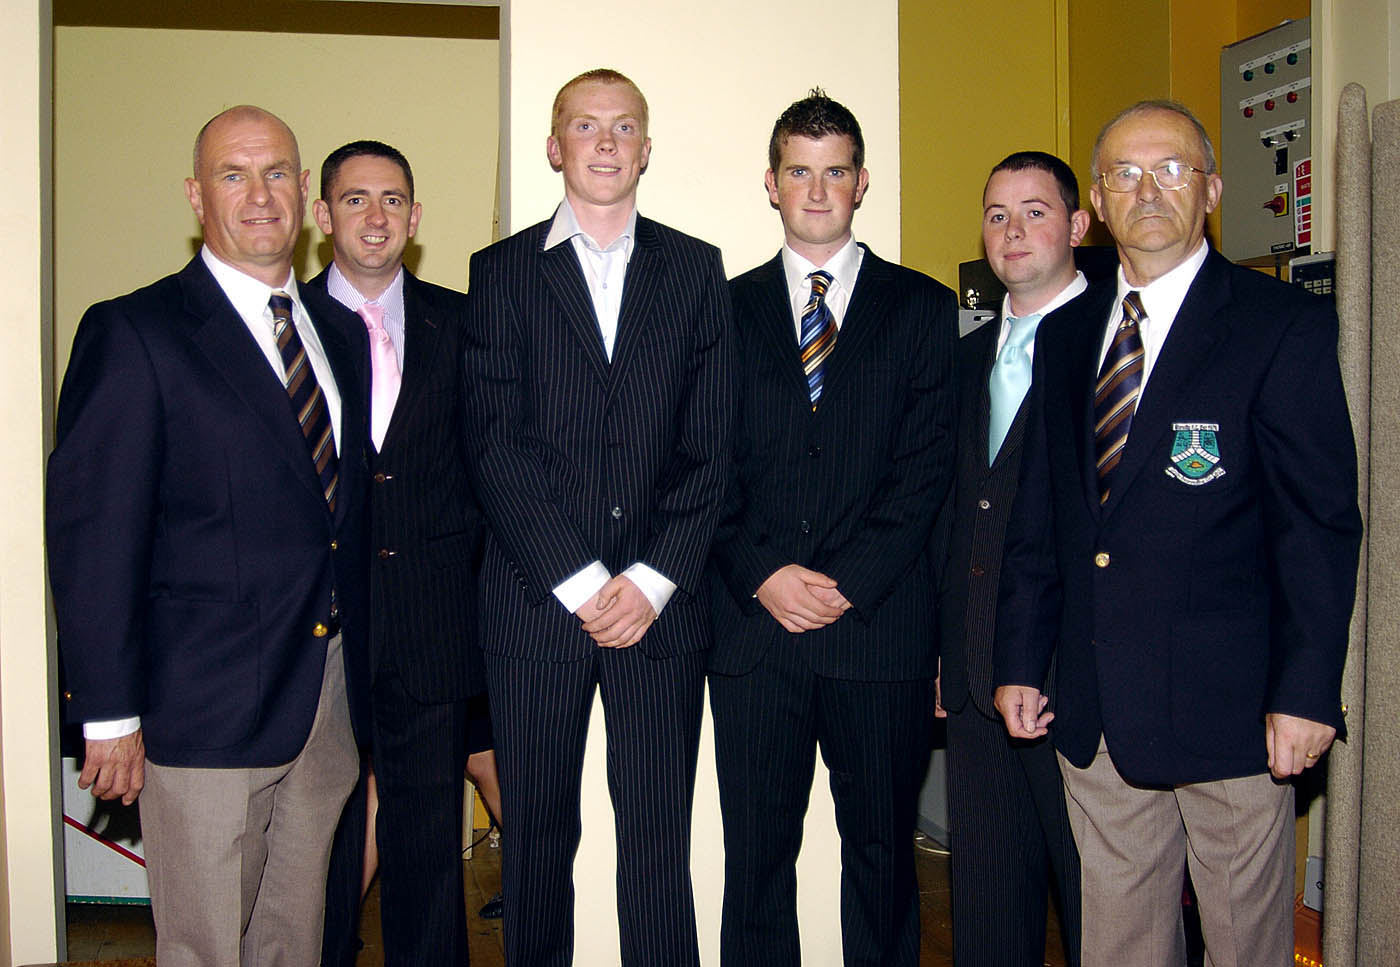 Pictured in the Resource centre in Balla at a Fashion Show organised by Manulla Football Club Youth Council to raise funds for Manulla Football Club. Outfits for the night were supplied by Next Step, Elverys, Adams at Shaws, Beverley Hills and Padraic McHales. Some of Manulla Football Club committee and players who were modelling clothes from Padraic McHales Castlebar  L-R: John Lavelle, John Henley, Ian Durkan, Colum McDonald, Damien Joyce and Tommy Rumley.  Photo  Ken Wright Photography 2007